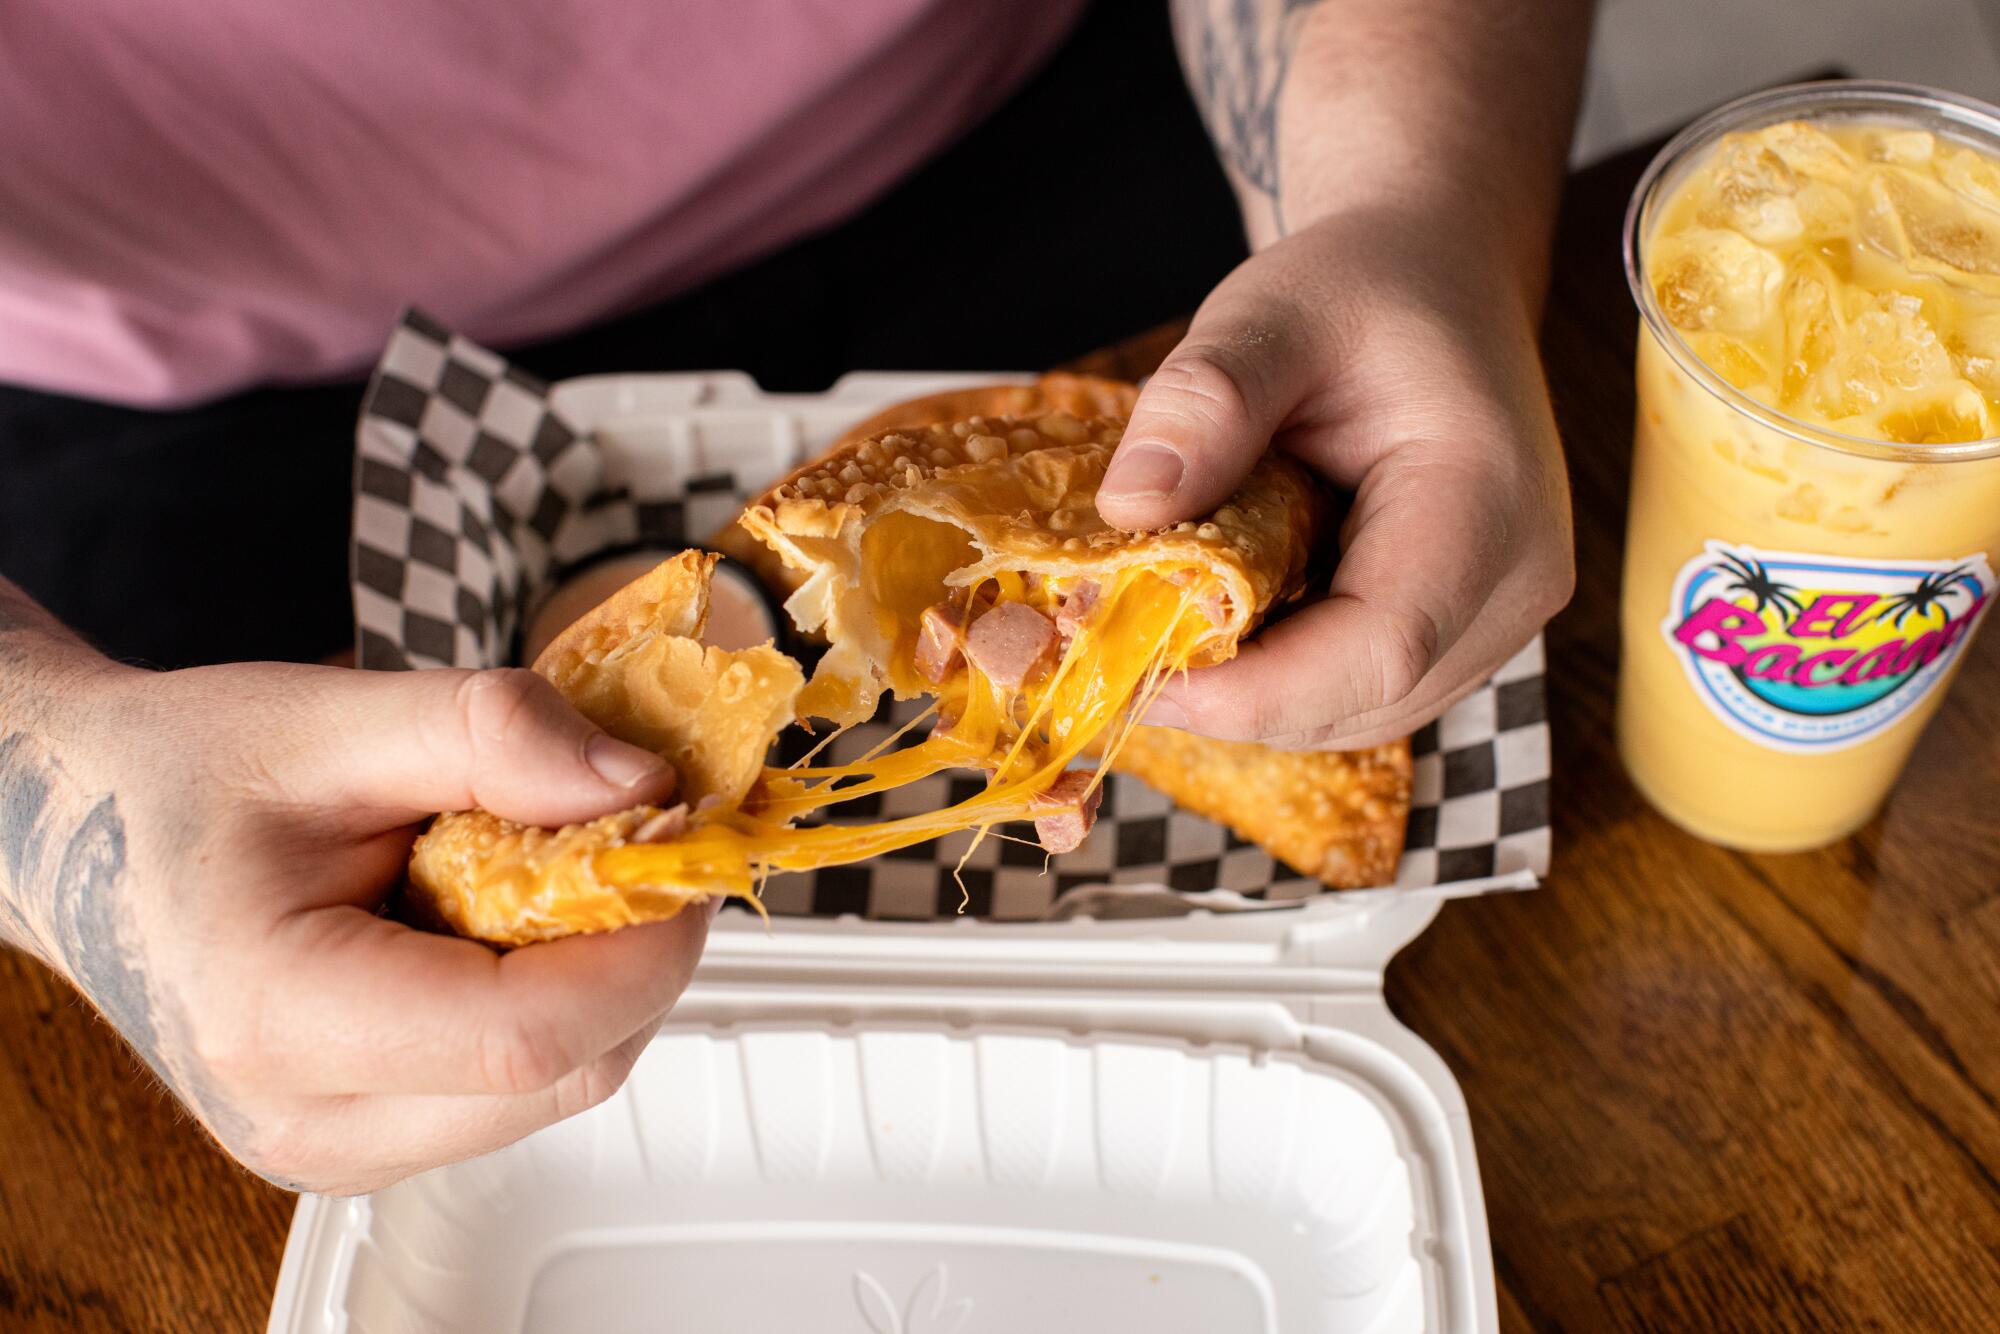 Salami and cheese empanada that opens to reveal the gooey, gooey contents. 